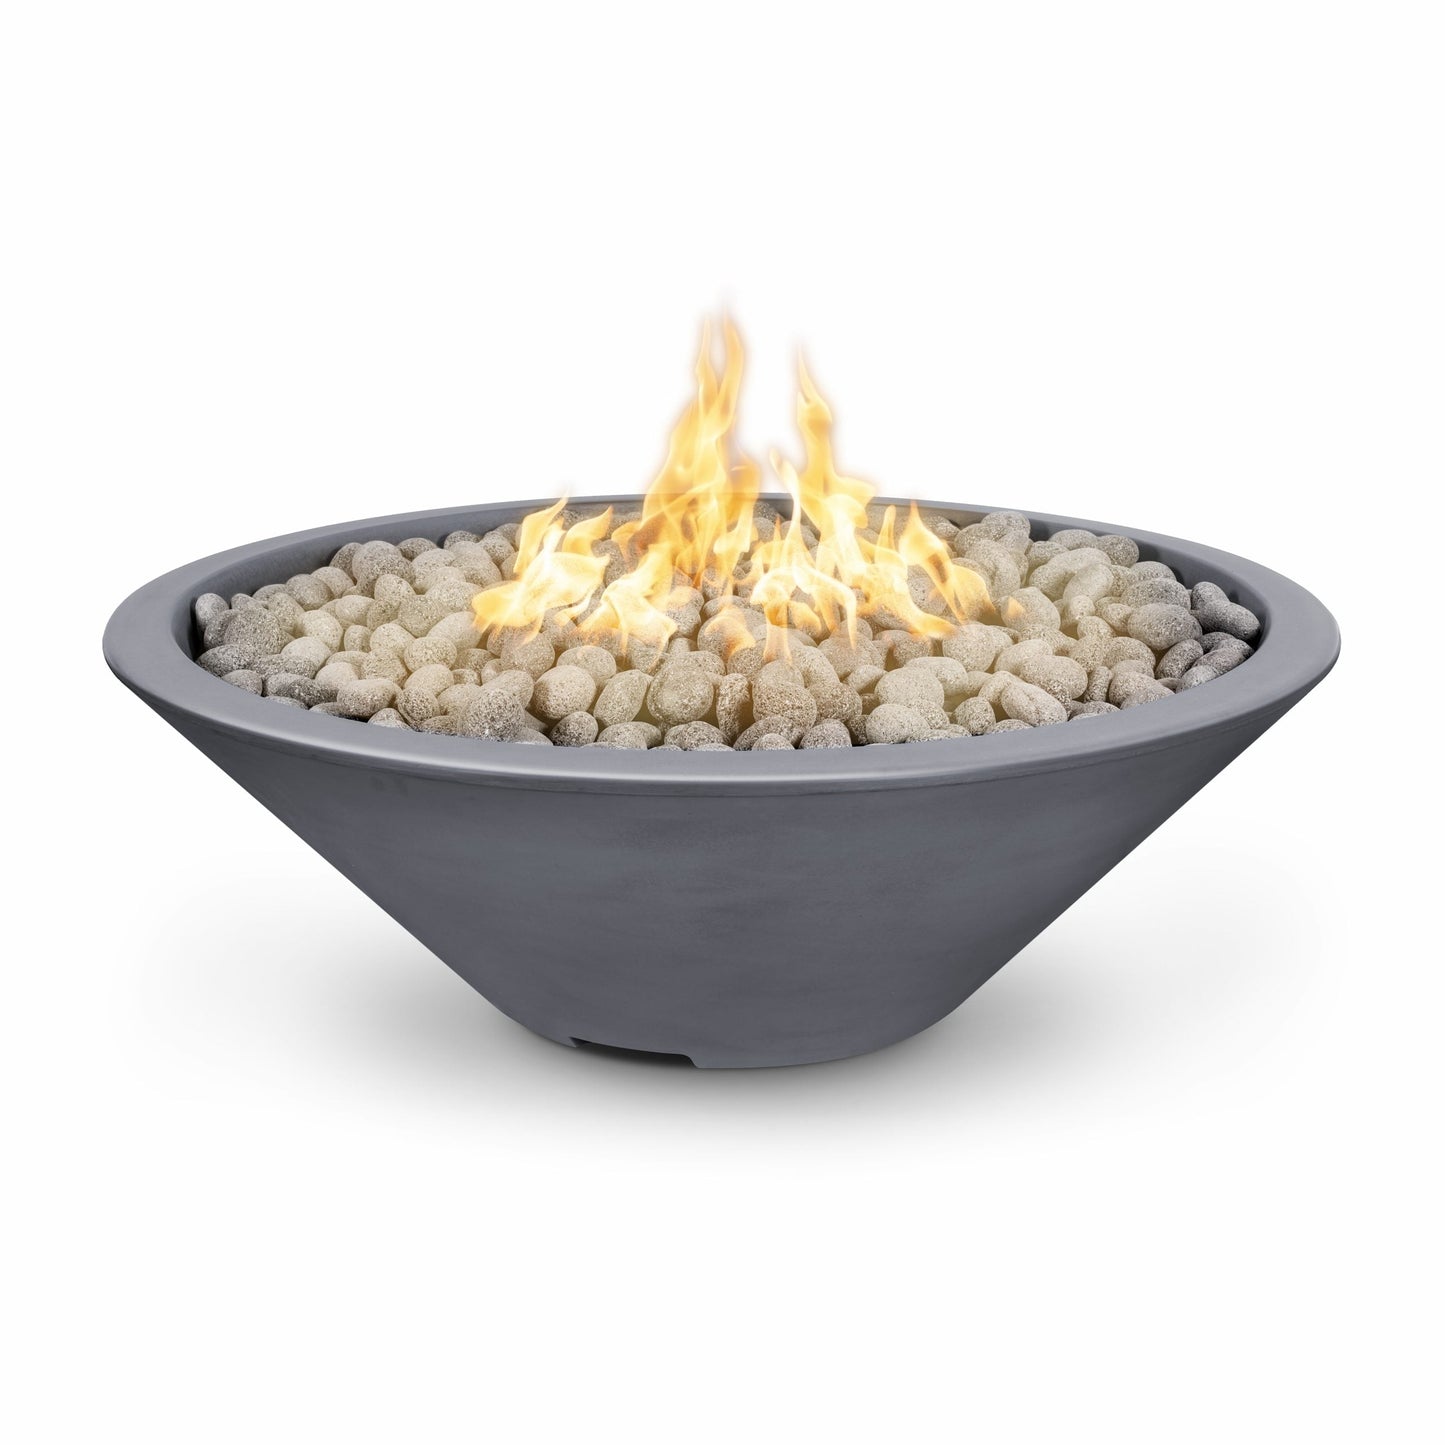 The Outdoor Plus Round Cazo 48" Java Powder Coated Metal Liquid Propane Fire Pit with Match Lit with Flame Sense Ignition